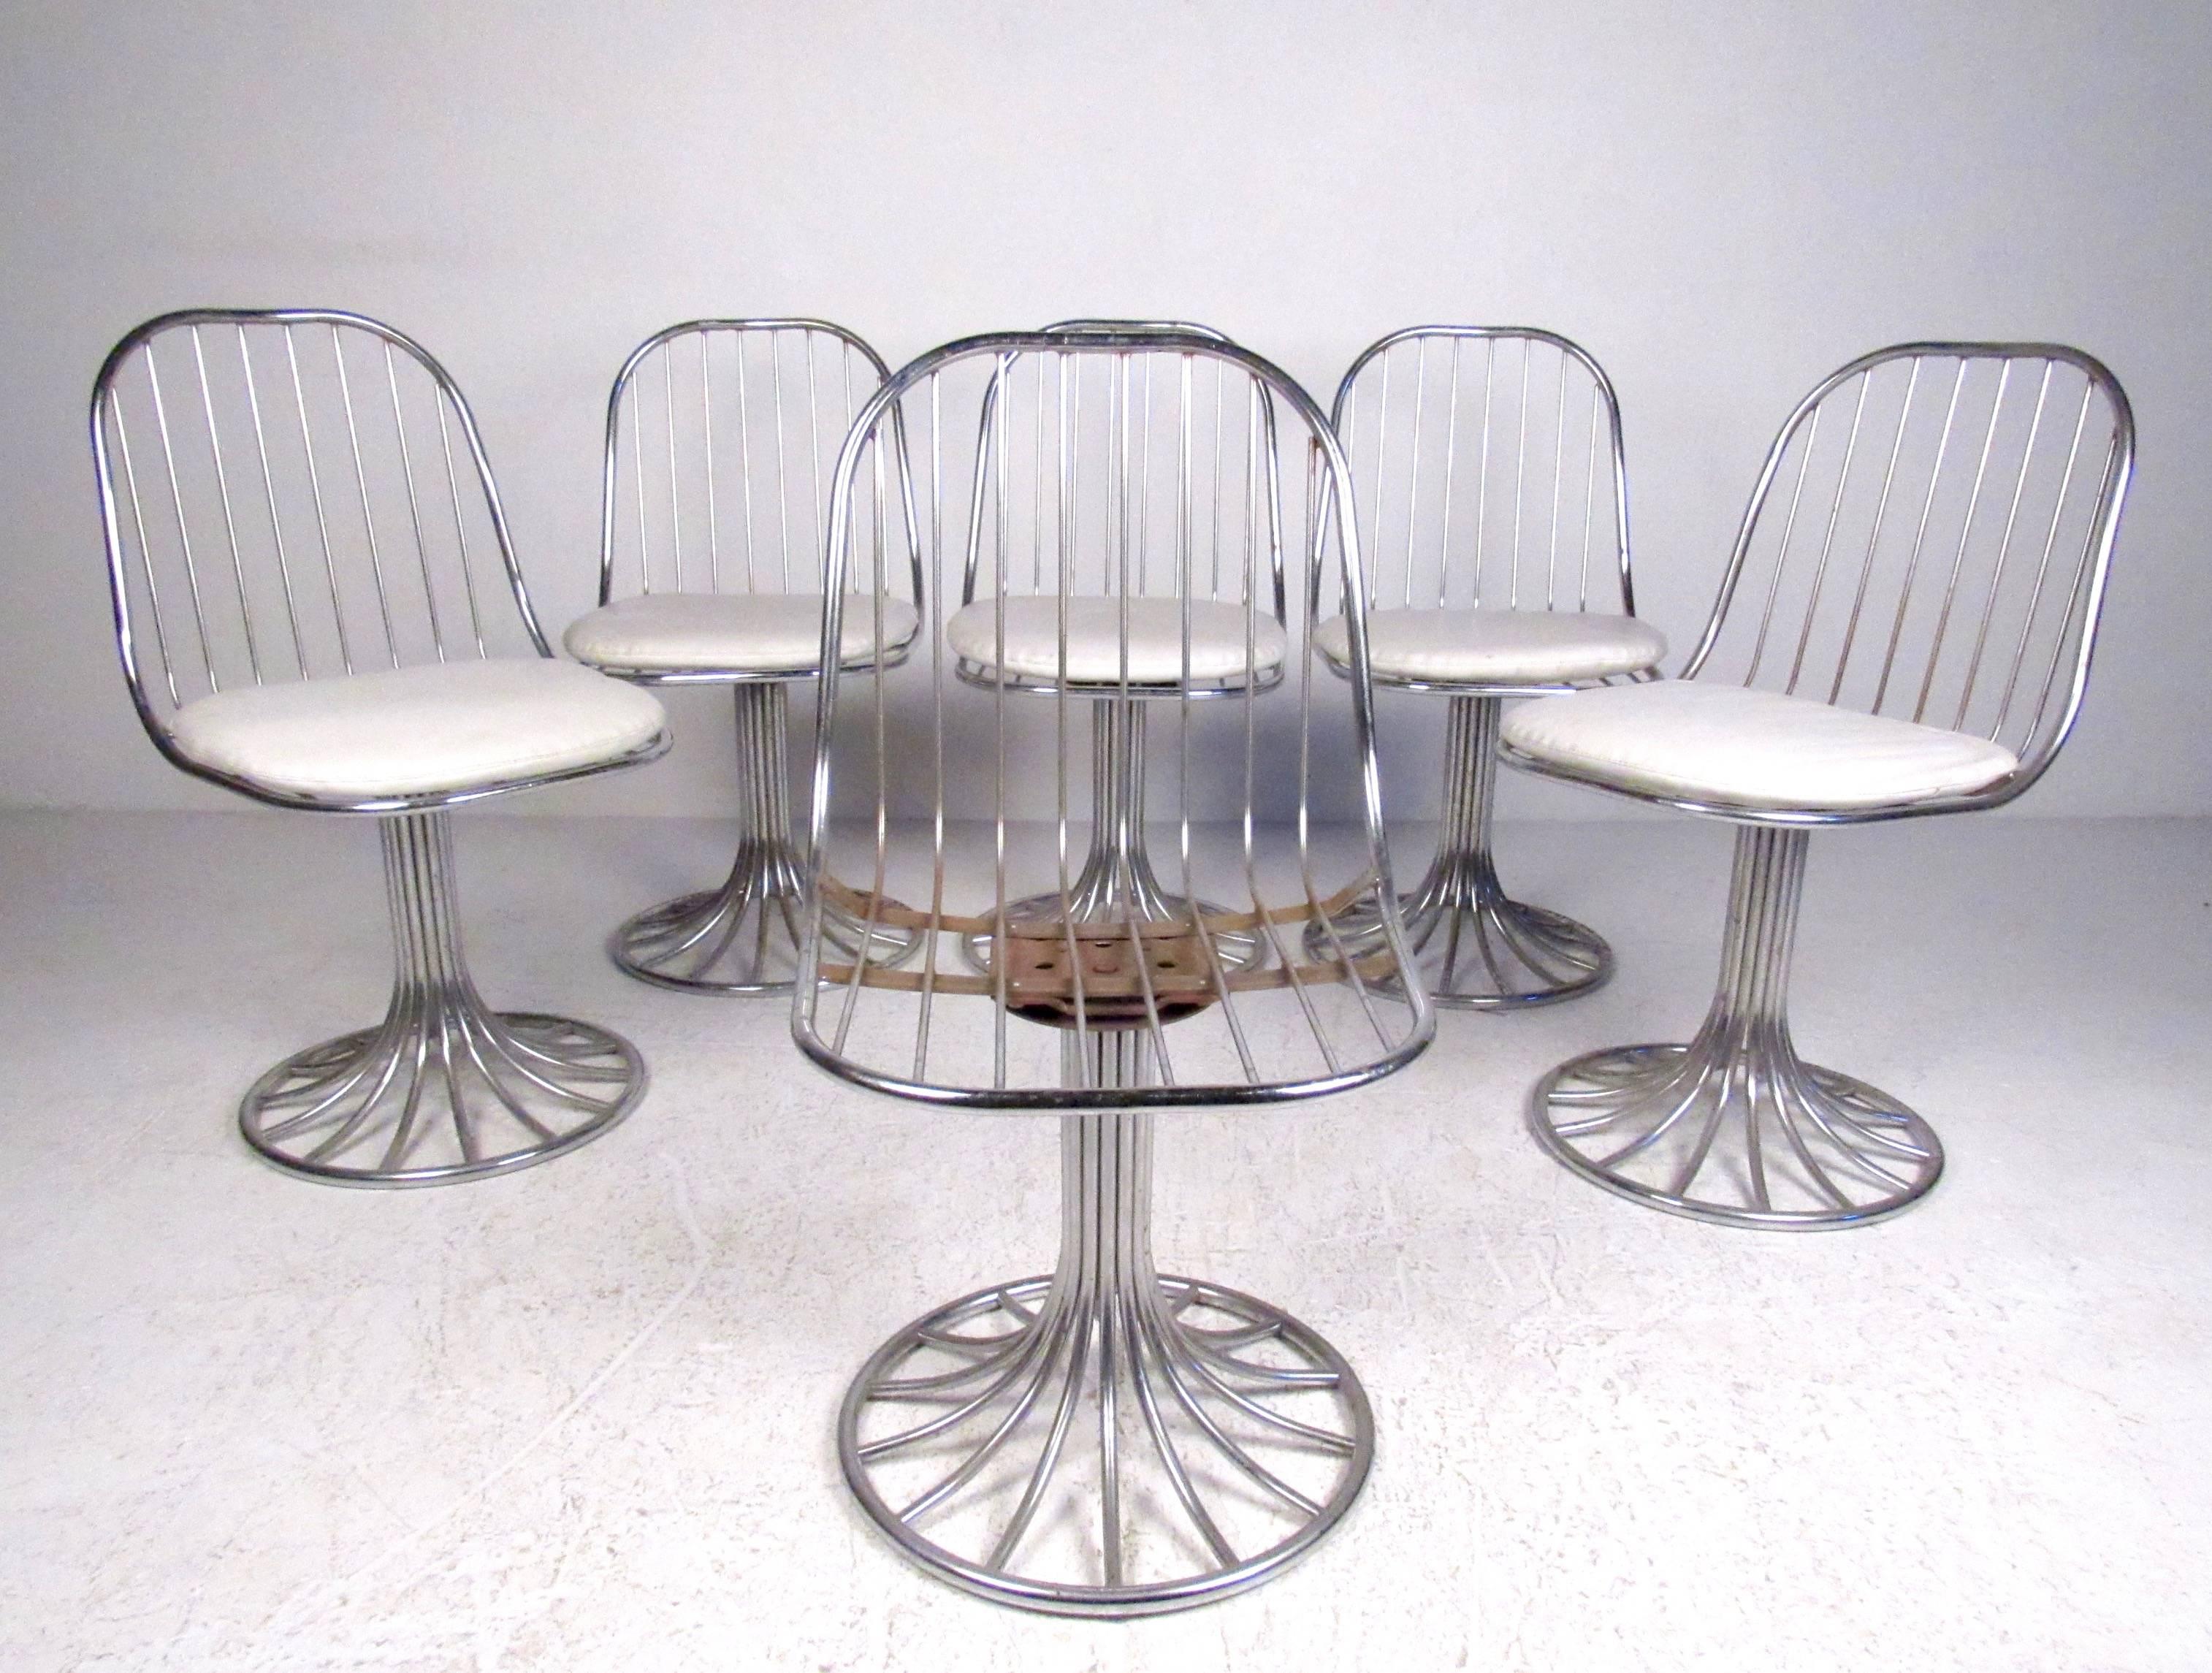 This stylish set of Mid-Century chrome swivel chairs feature unique bent spoke construction, with a tulip pedestal base and shapely seat back. Padded cushion and comfortable proportions make this the perfect set of vintage swivel dining chairs for